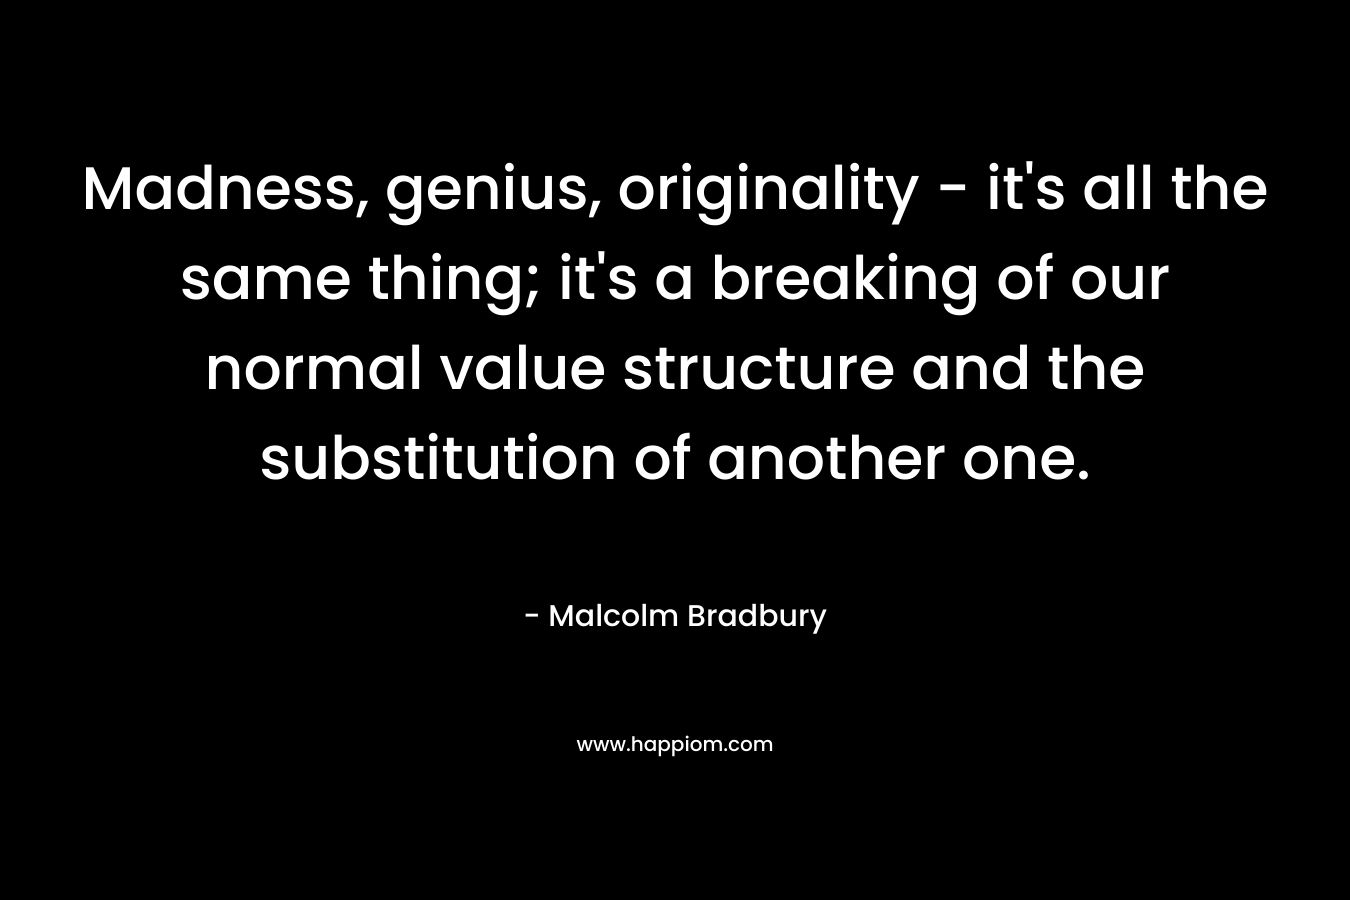 Madness, genius, originality – it’s all the same thing; it’s a breaking of our normal value structure and the substitution of another one. – Malcolm Bradbury